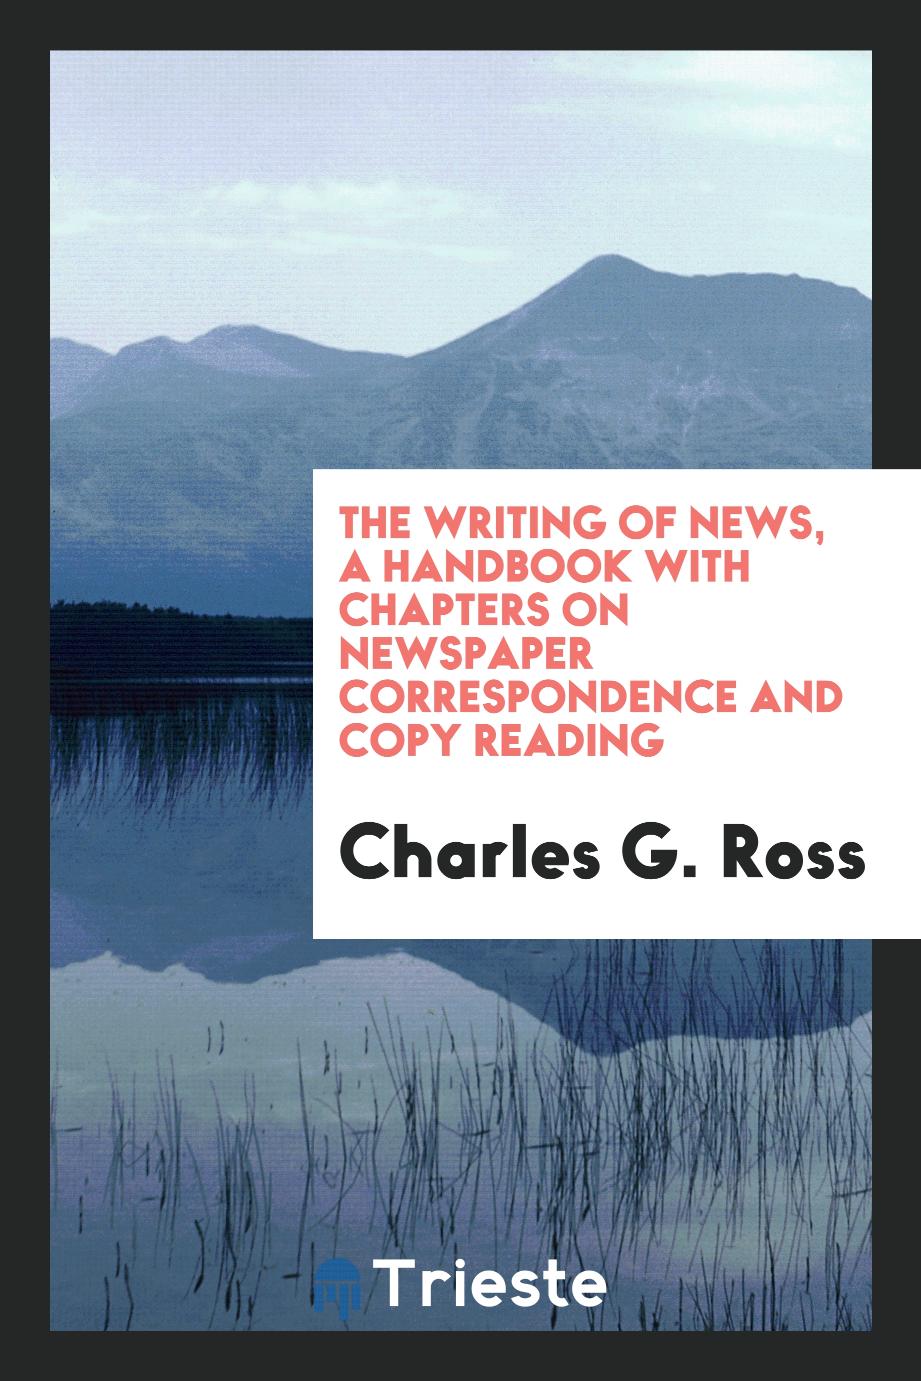 The writing of news, a handbook with chapters on newspaper correspondence and copy reading